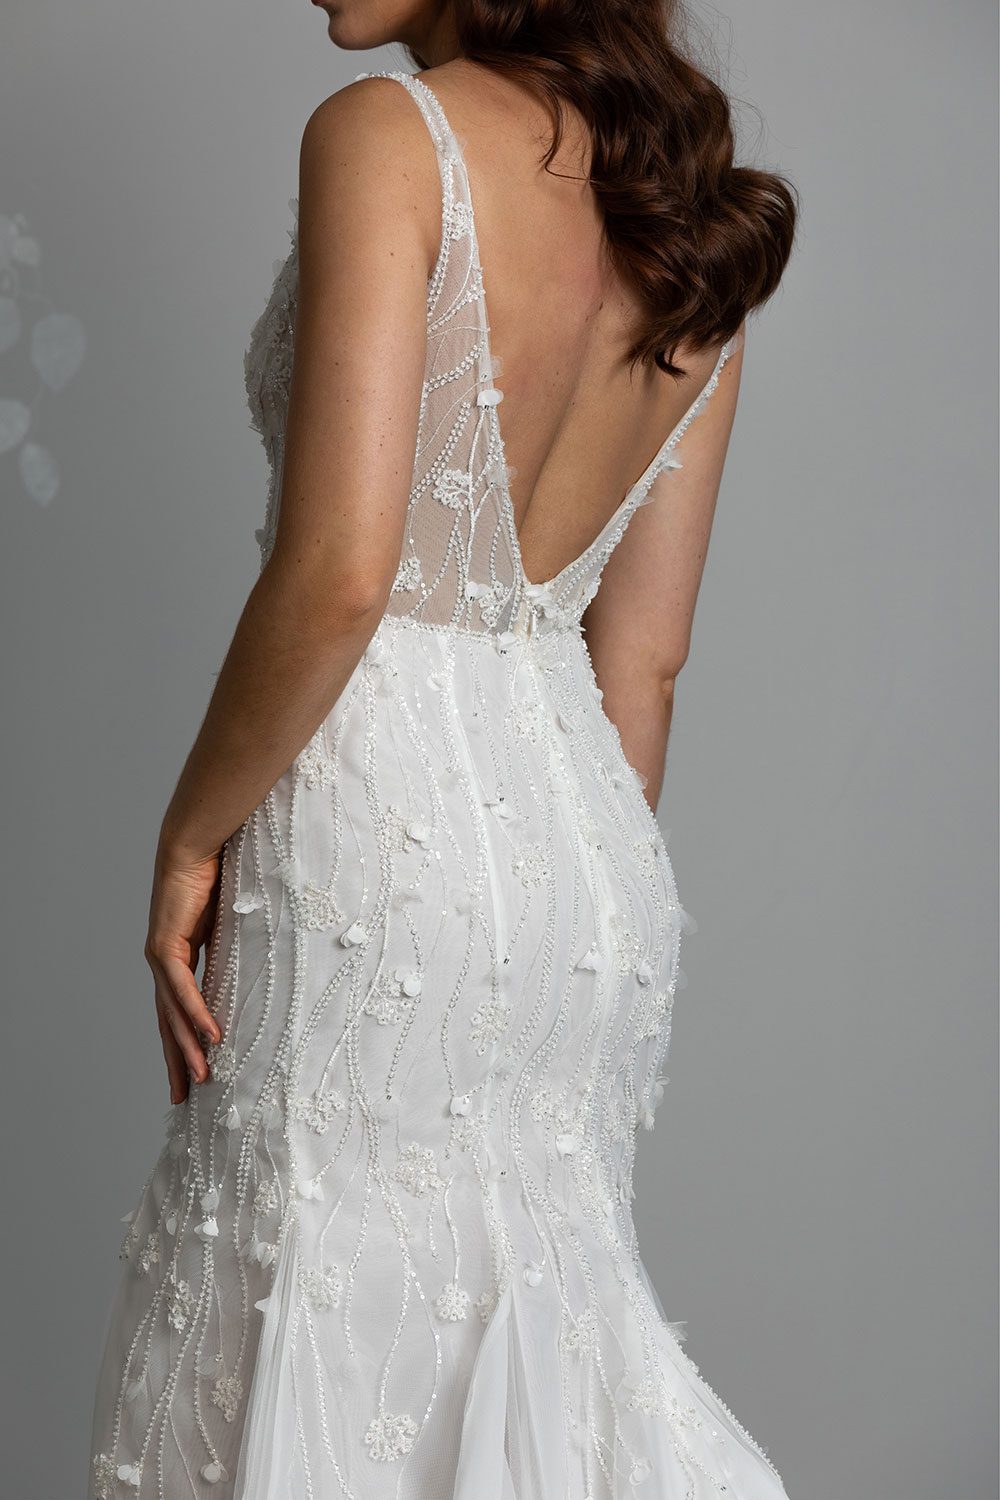 Bronte Wedding Dress by Vinka Design - Featuring a form sculpting mermaid silhouette that embraces the wearer's curves, and intricately embroidered, beaded, botanical lace that trails seamlessly from the bodice into the skirt. Crafted on a semi-sheer base, the bodice boasts a V-neckline and beautiful low V-back. Artfully constructed with layers of dreamy, yet dramatic silk organza and soft tulle, added flare and fullness is achieved through the skirt which fans into a sweeping opulent train. Back view of model wearing low V back bodice with intricately embroidered beaded botanical lace